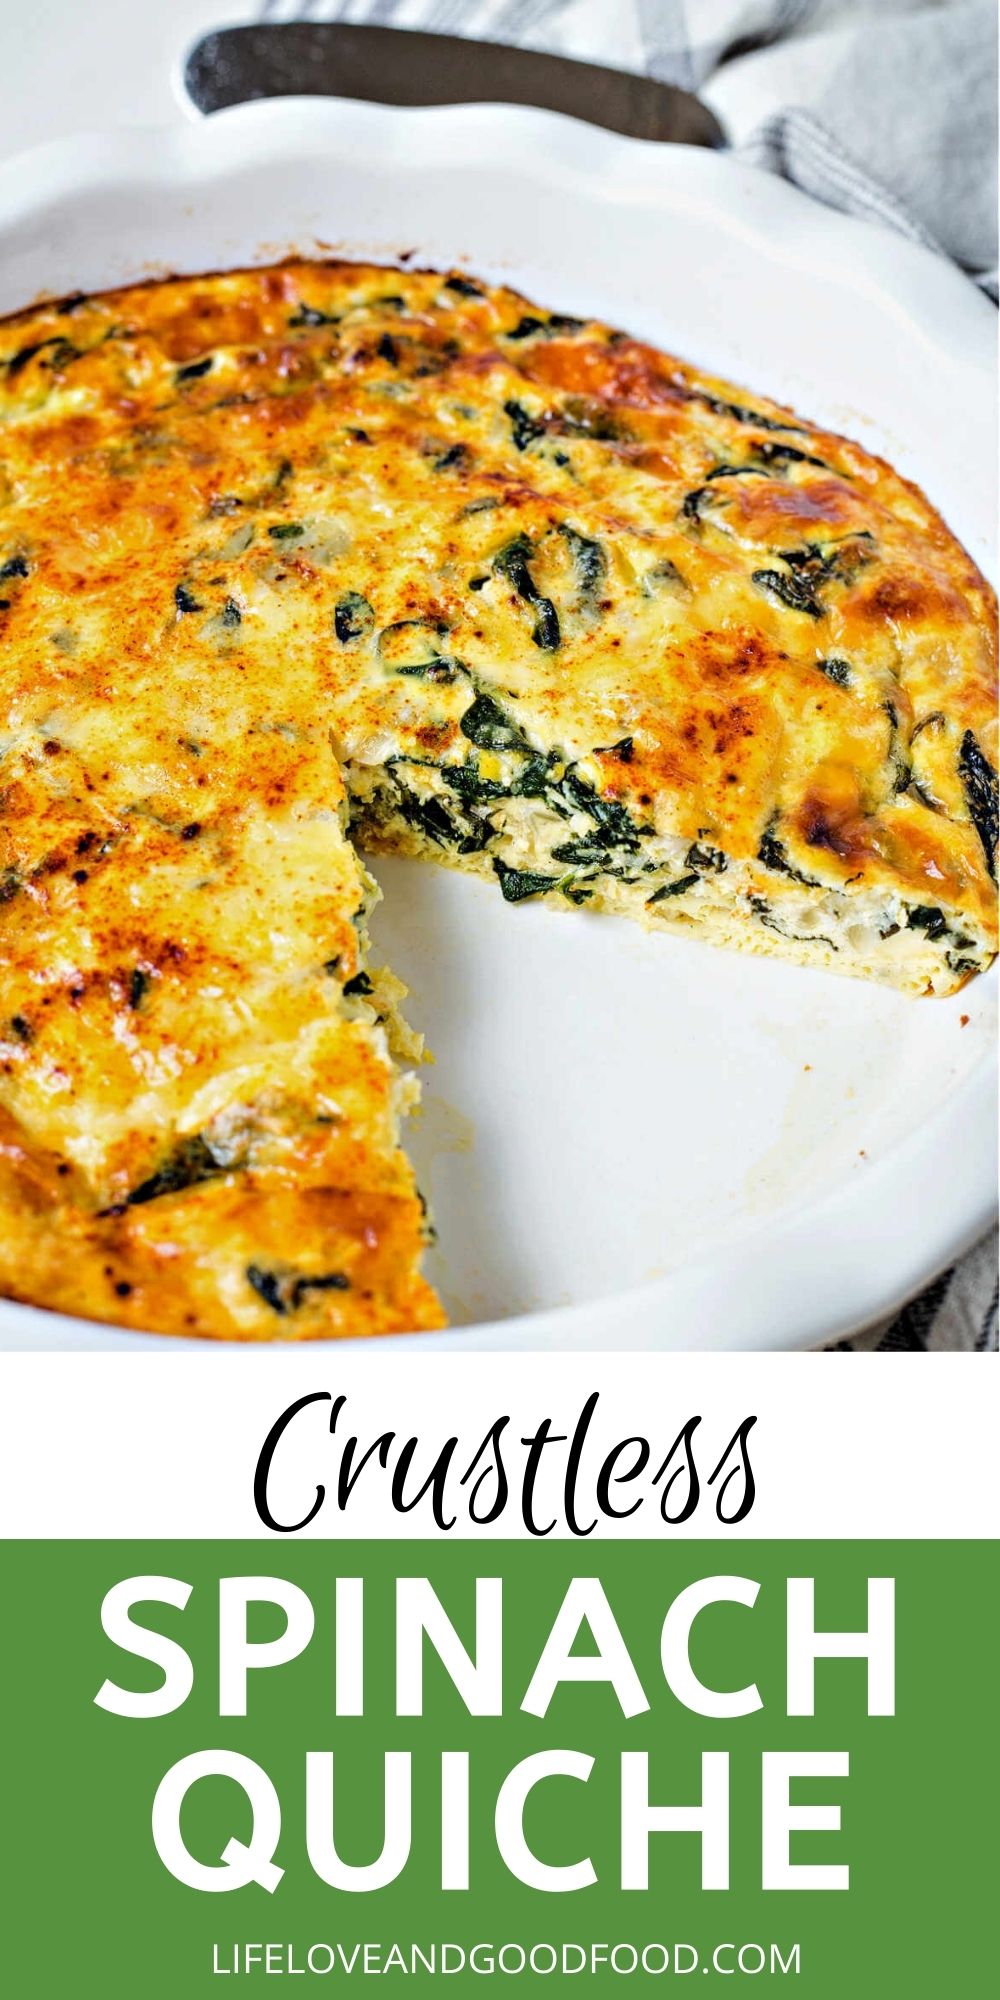 Crustless Spinach Quiche - Life, Love, and Good Food